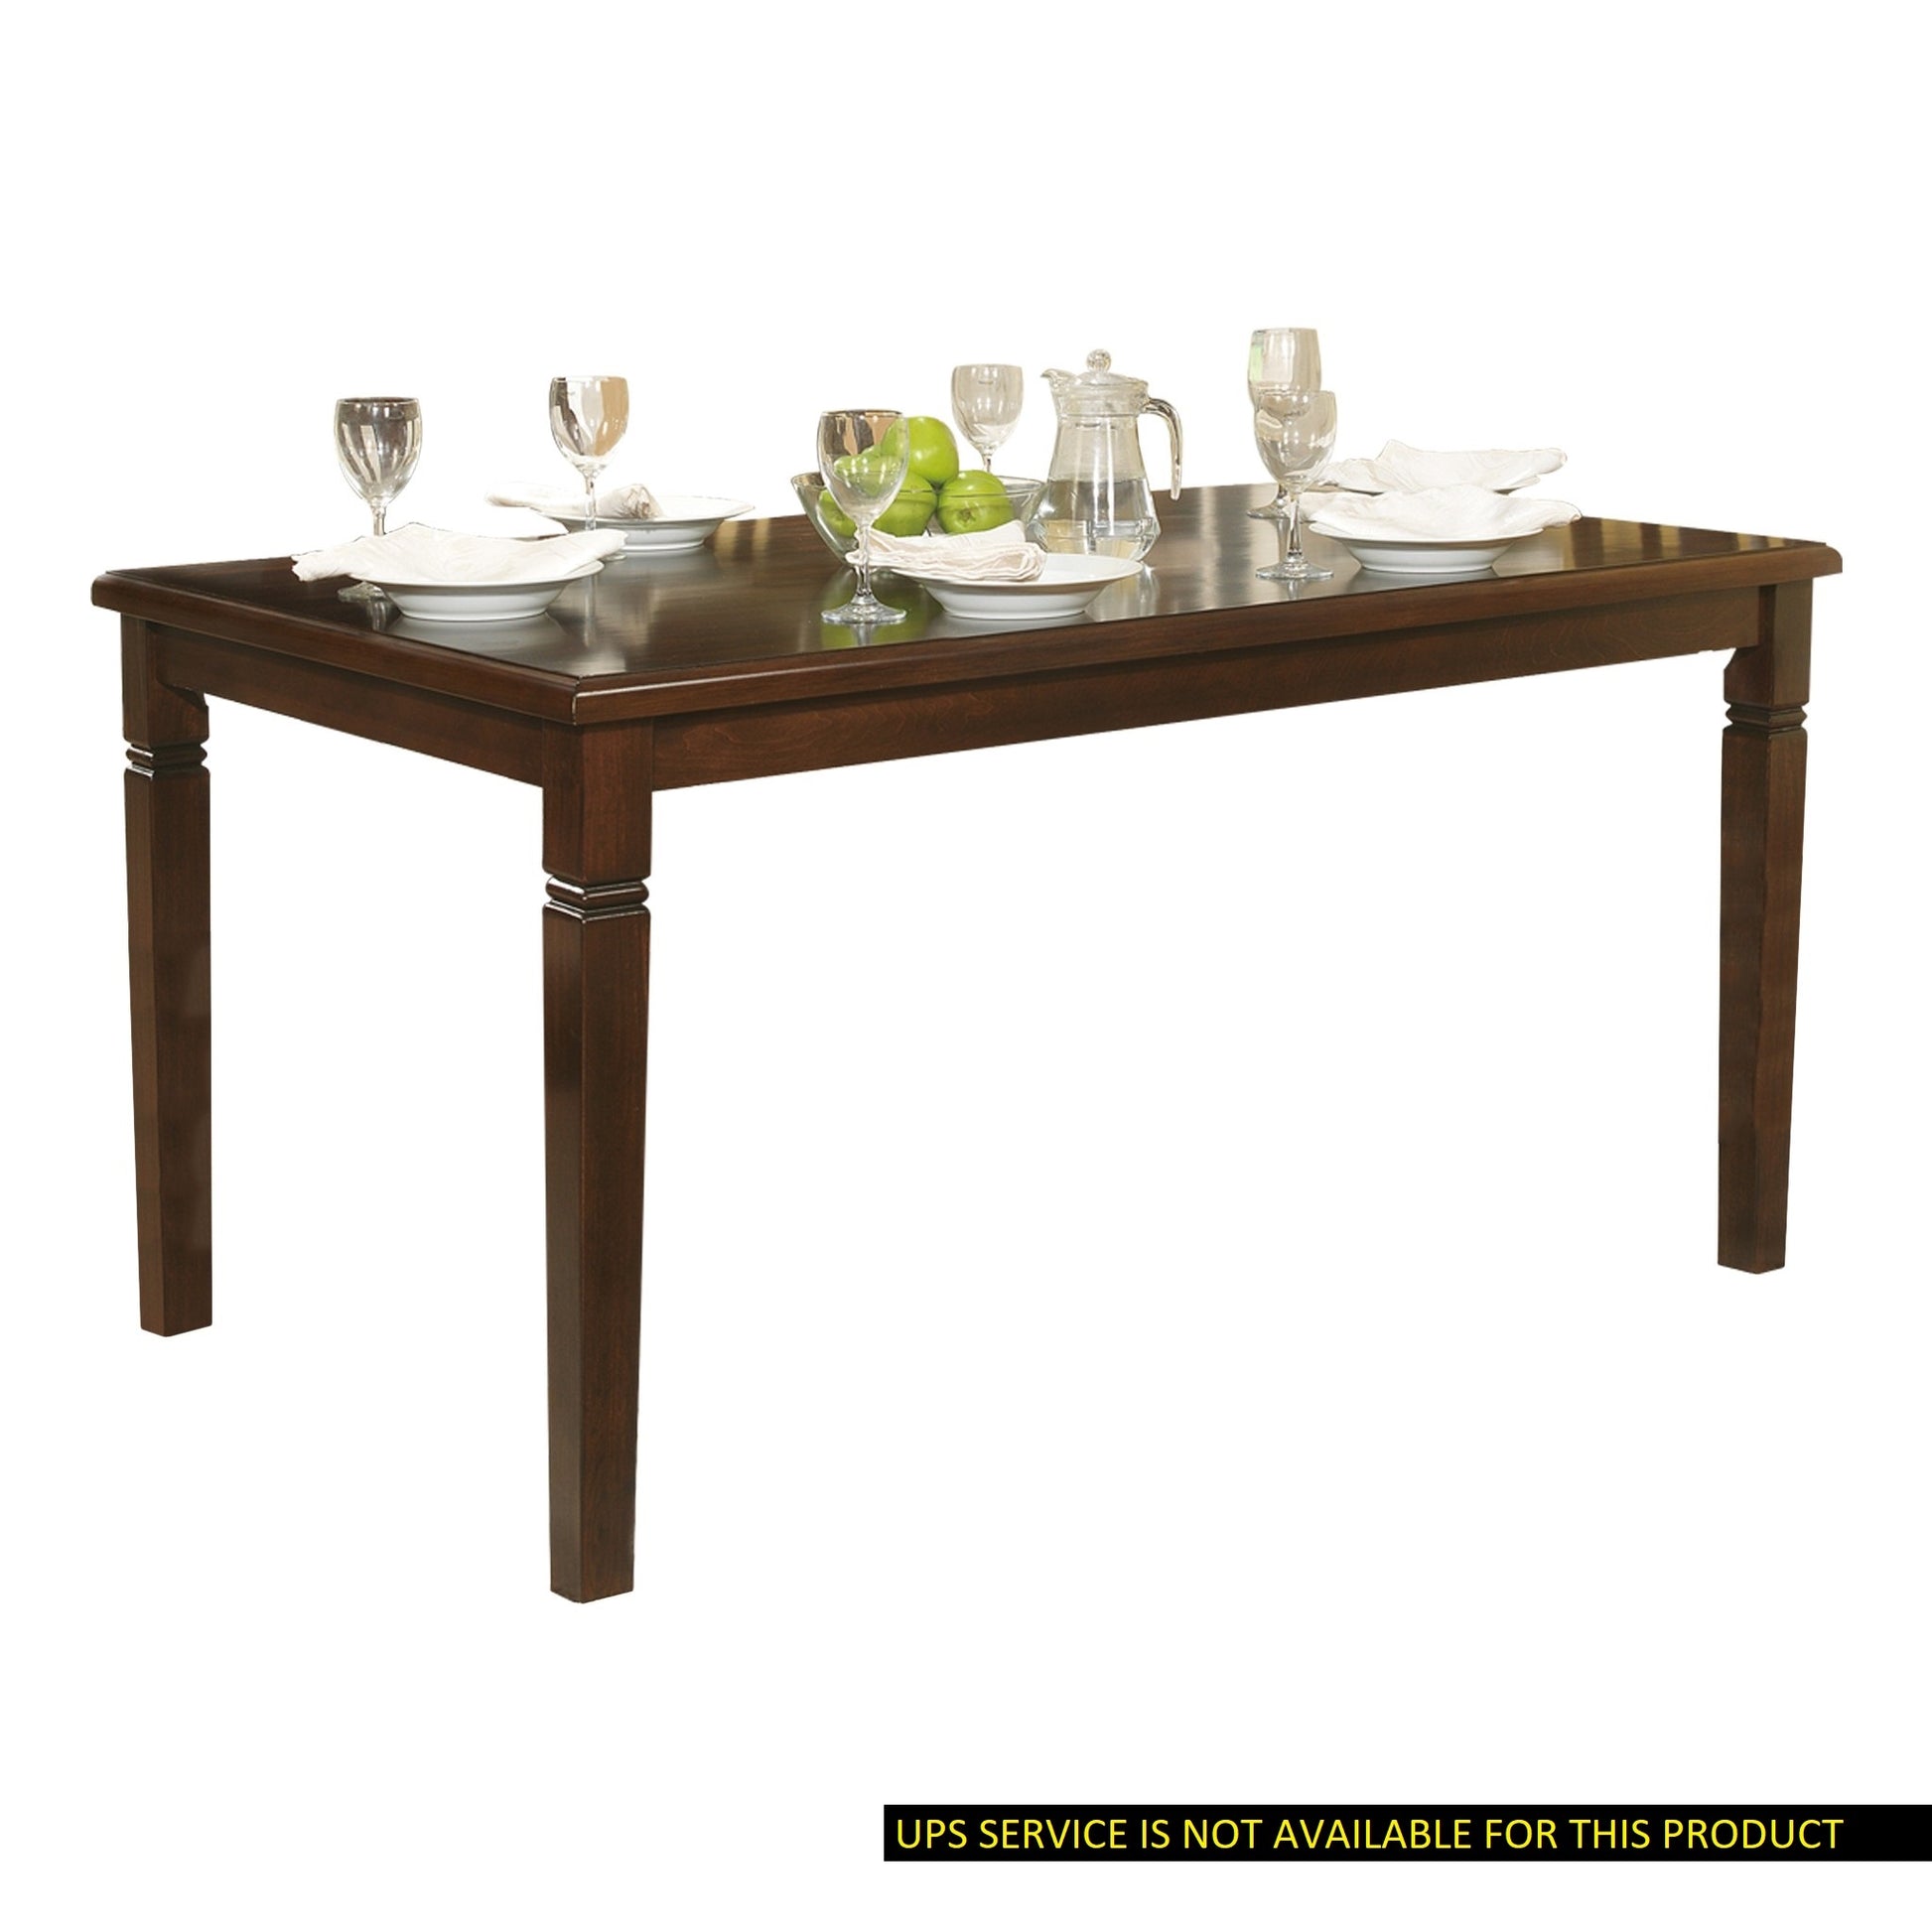 Espresso Finish Transitional Style 1pc Dining Table espresso-dining room-transitional-wood